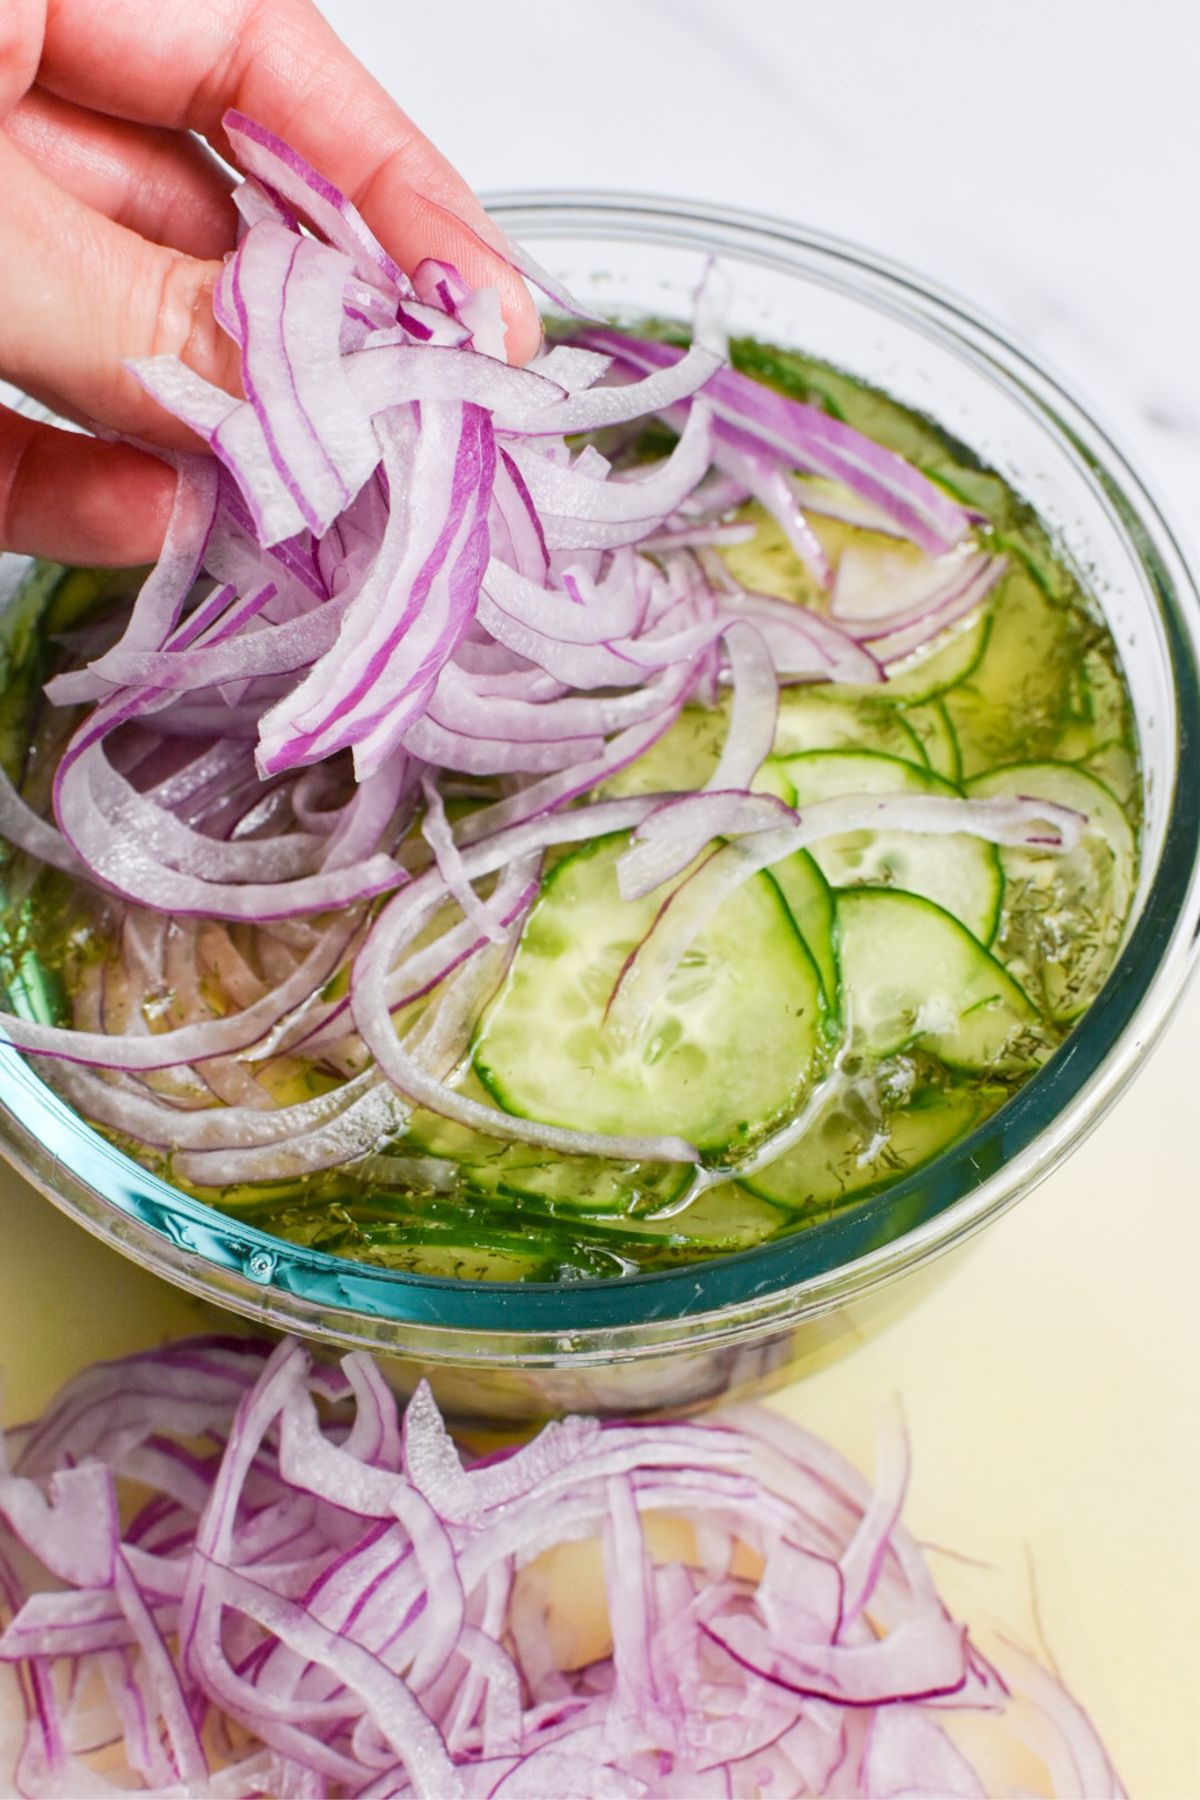 Red onion being added to a bowl of cucumbers, apple cider vinegar and water.